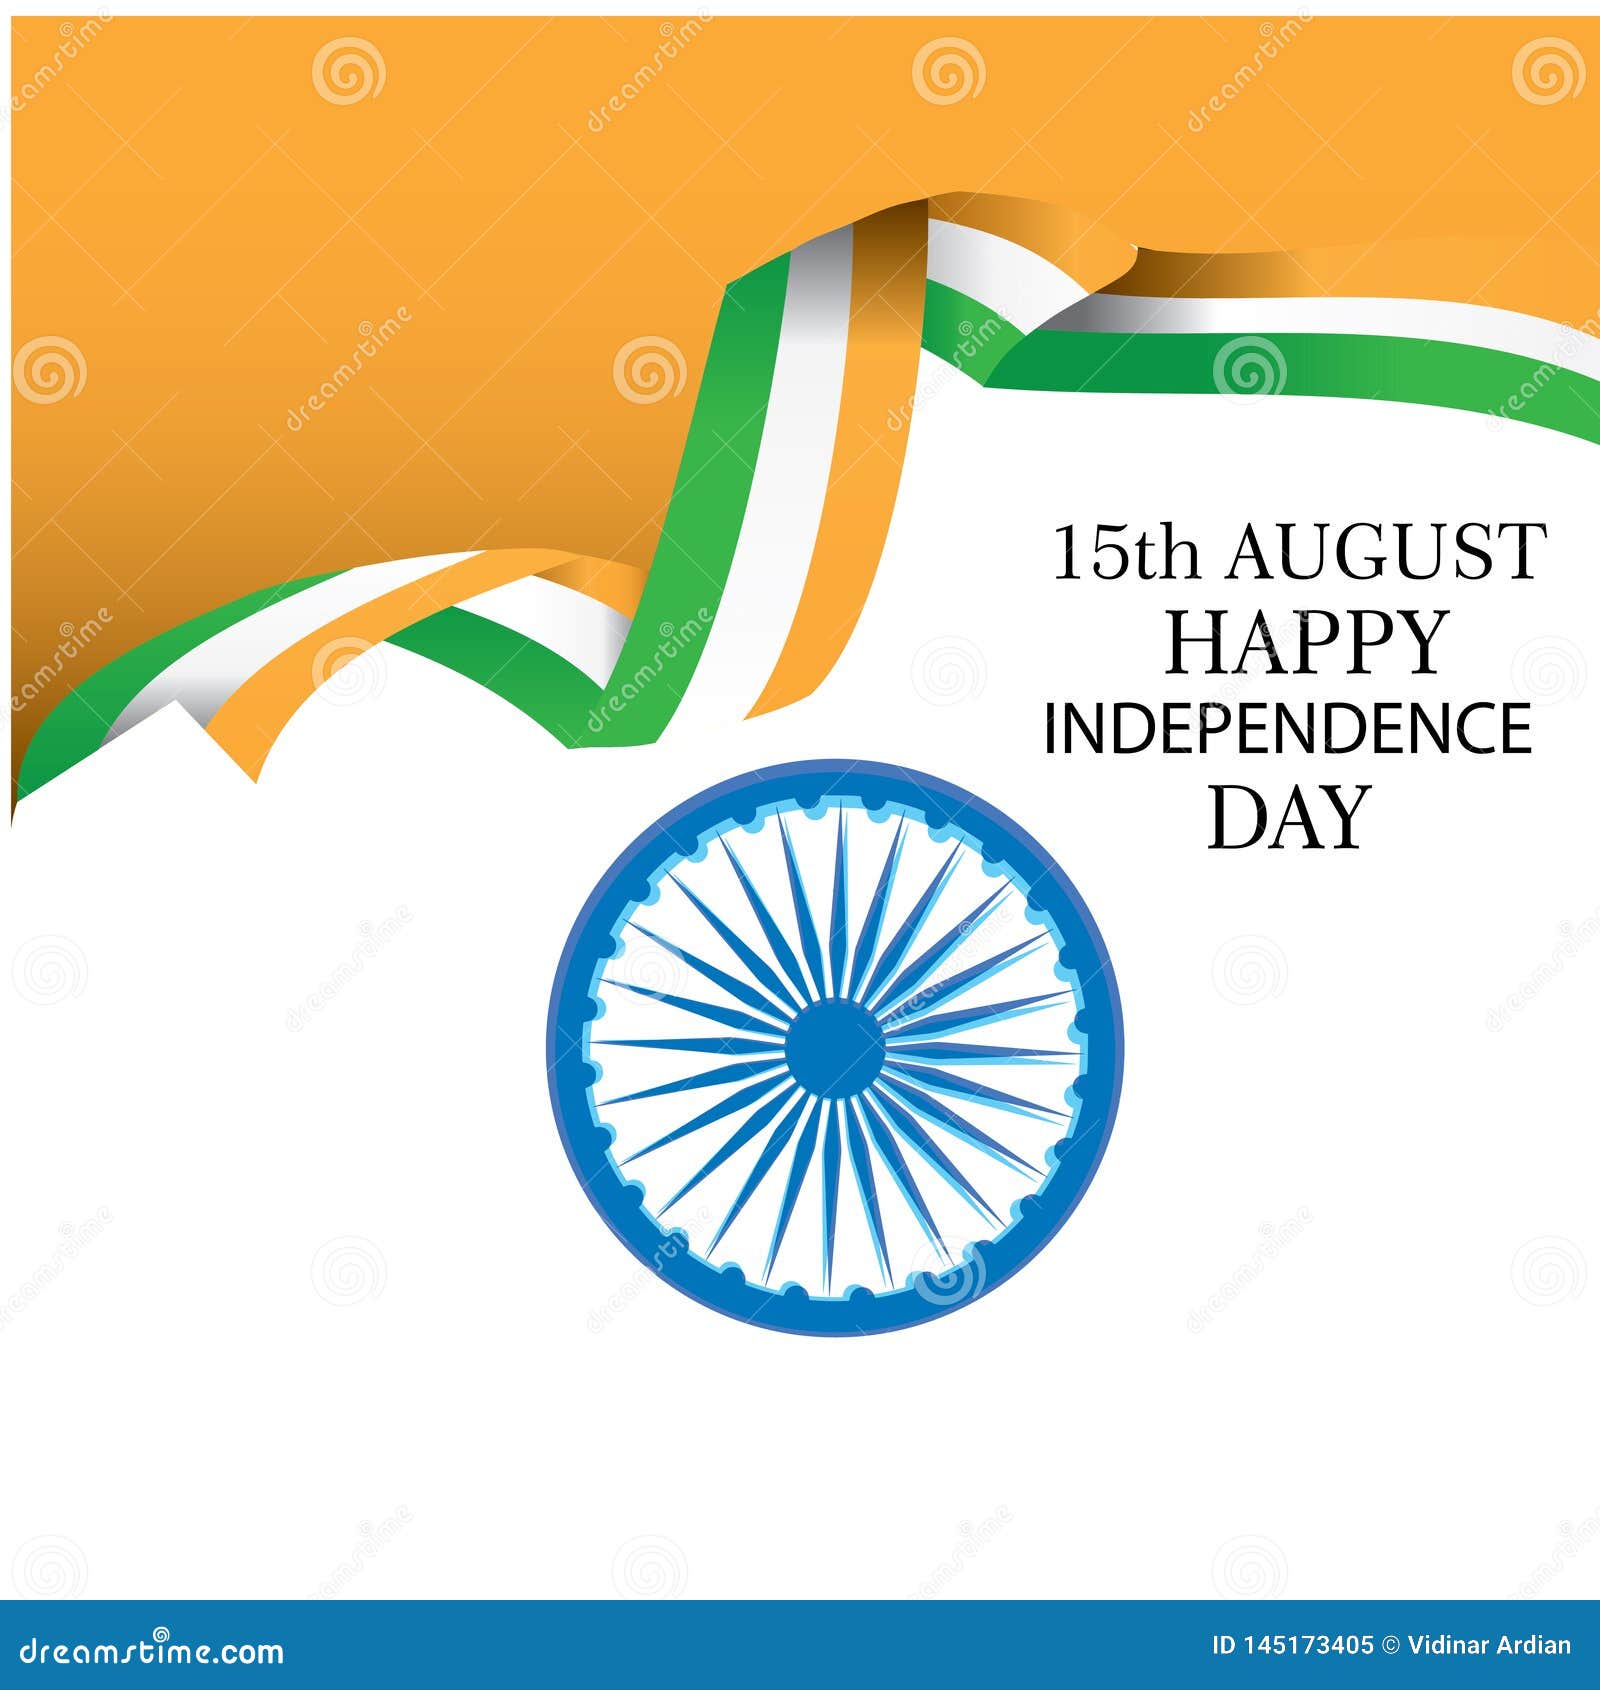 Creative Indian National Flag Background , Elegant Poster, Banner or Design  for 15th August, Happy Independence Day Celebration Stock Vector -  Illustration of democratic, creative: 145173405